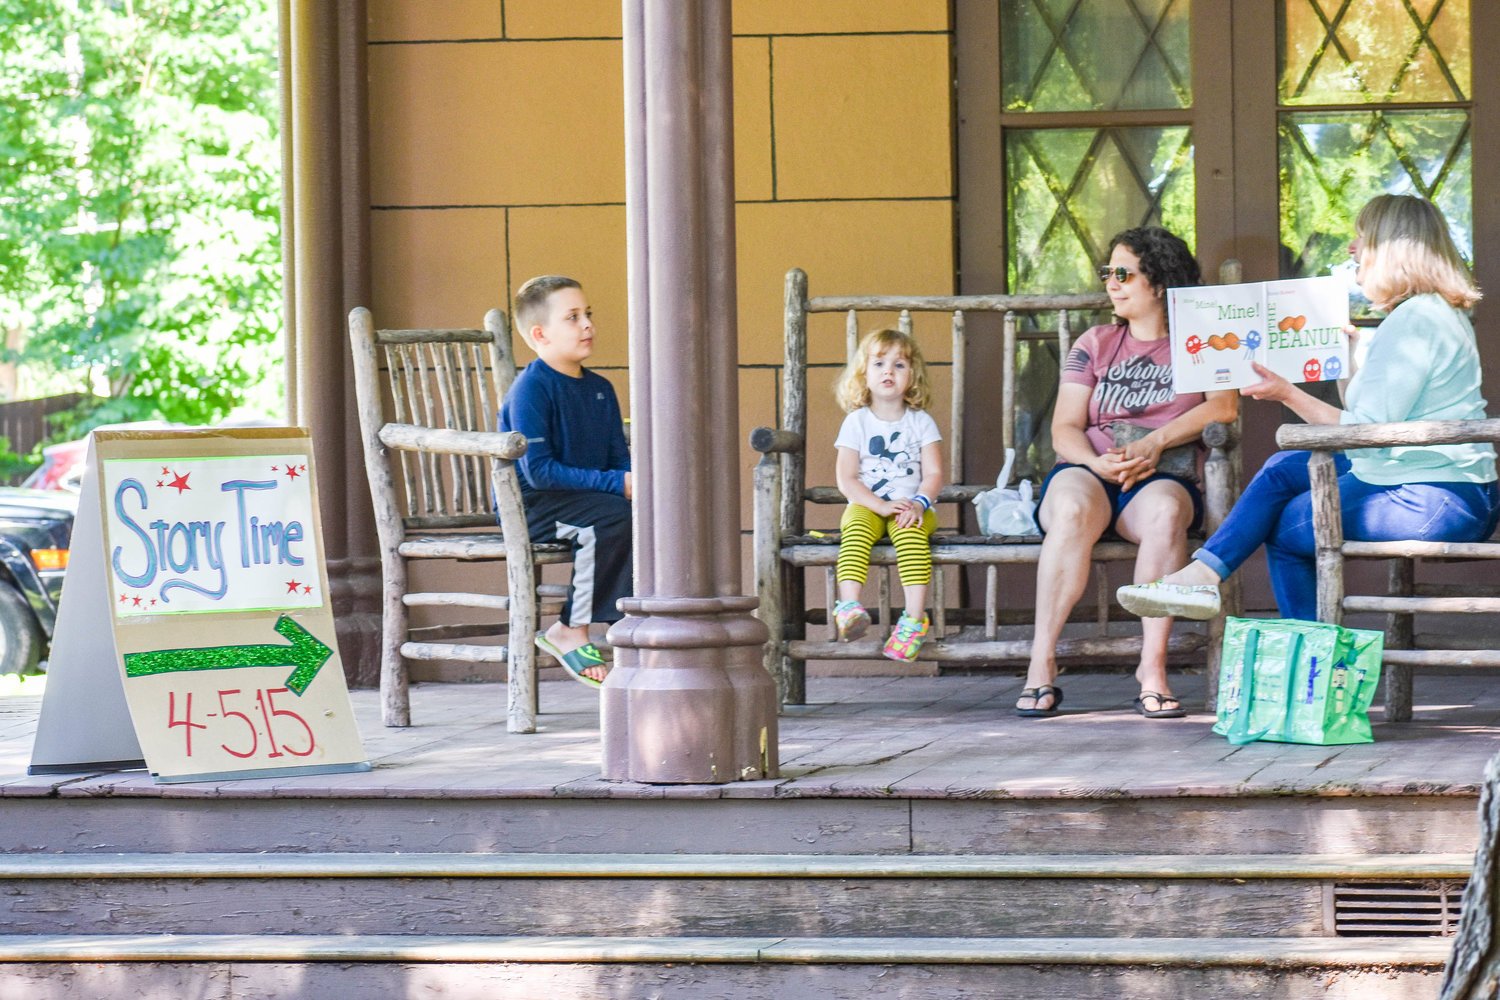 Left to right: Eight-year-old Henrik Ritter, three-year-old Marliese Ritter, and Sarah Mastrolia  enjoy story time on the front steps of the Madison County Historical Society while visiting the farmer's market on the front lawn on Tuesday.